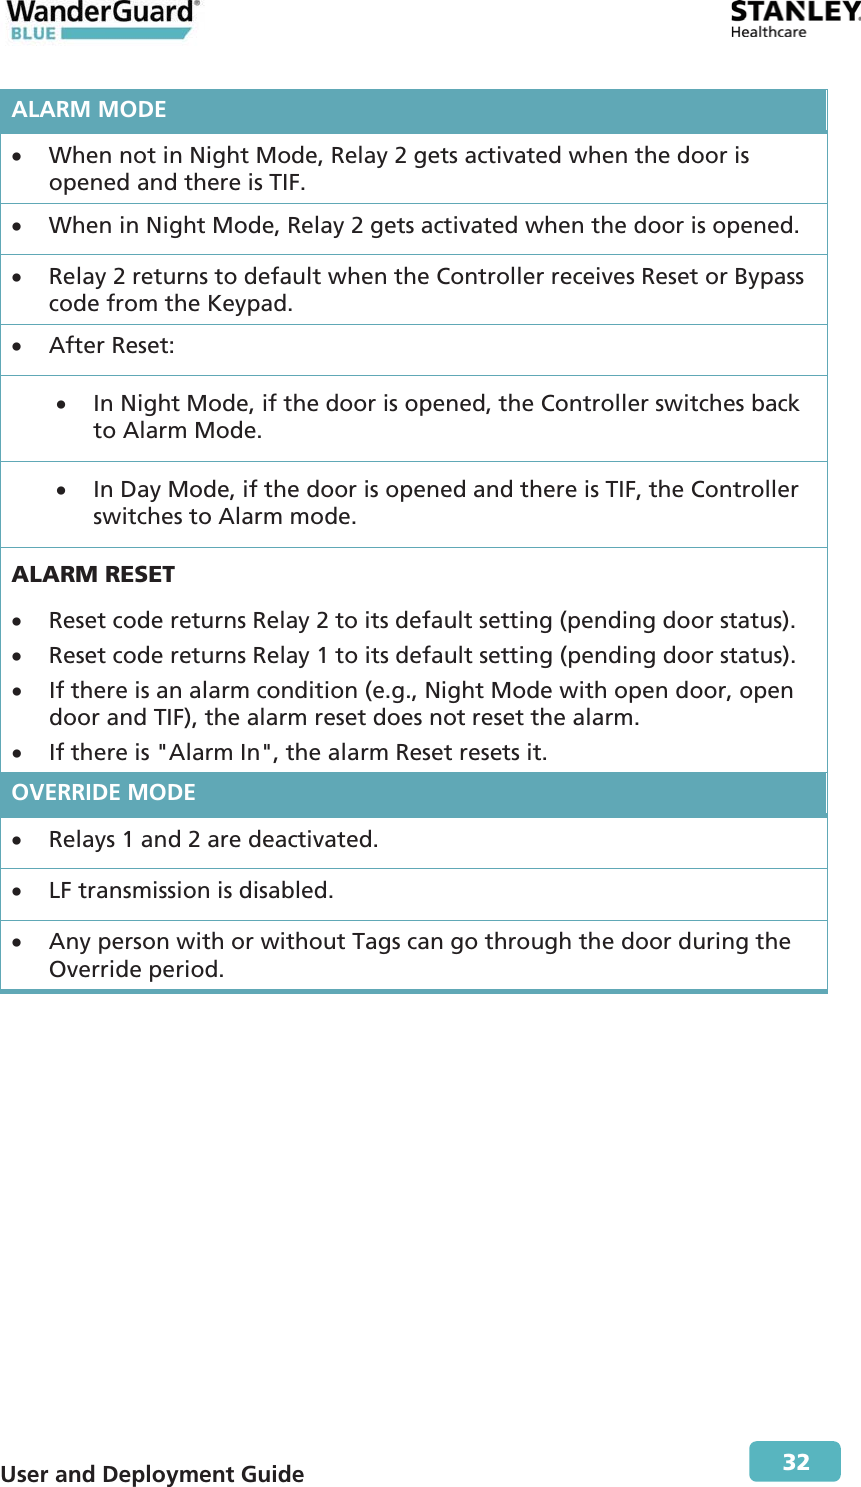  User and Deployment Guide        32 ALARM MODEx When not in Night Mode, Relay 2 gets activated when the door is opened and there is TIF. x When in Night Mode, Relay 2 gets activated when the door is opened. x Relay 2 returns to default when the Controller receives Reset or Bypass code from the Keypad. x After Reset: x In Night Mode, if the door is opened, the Controller switches back to Alarm Mode. x In Day Mode, if the door is opened and there is TIF, the Controller switches to Alarm mode. ALARM RESET x Reset code returns Relay 2 to its default setting (pending door status). x Reset code returns Relay 1 to its default setting (pending door status). x If there is an alarm condition (e.g., Night Mode with open door, open door and TIF), the alarm reset does not reset the alarm. x If there is &quot;Alarm In&quot;, the alarm Reset resets it. OVERRIDE MODE x Relays 1 and 2 are deactivated. xLF transmission is disabled.x Any person with or without Tags can go through the door during the Override period. 